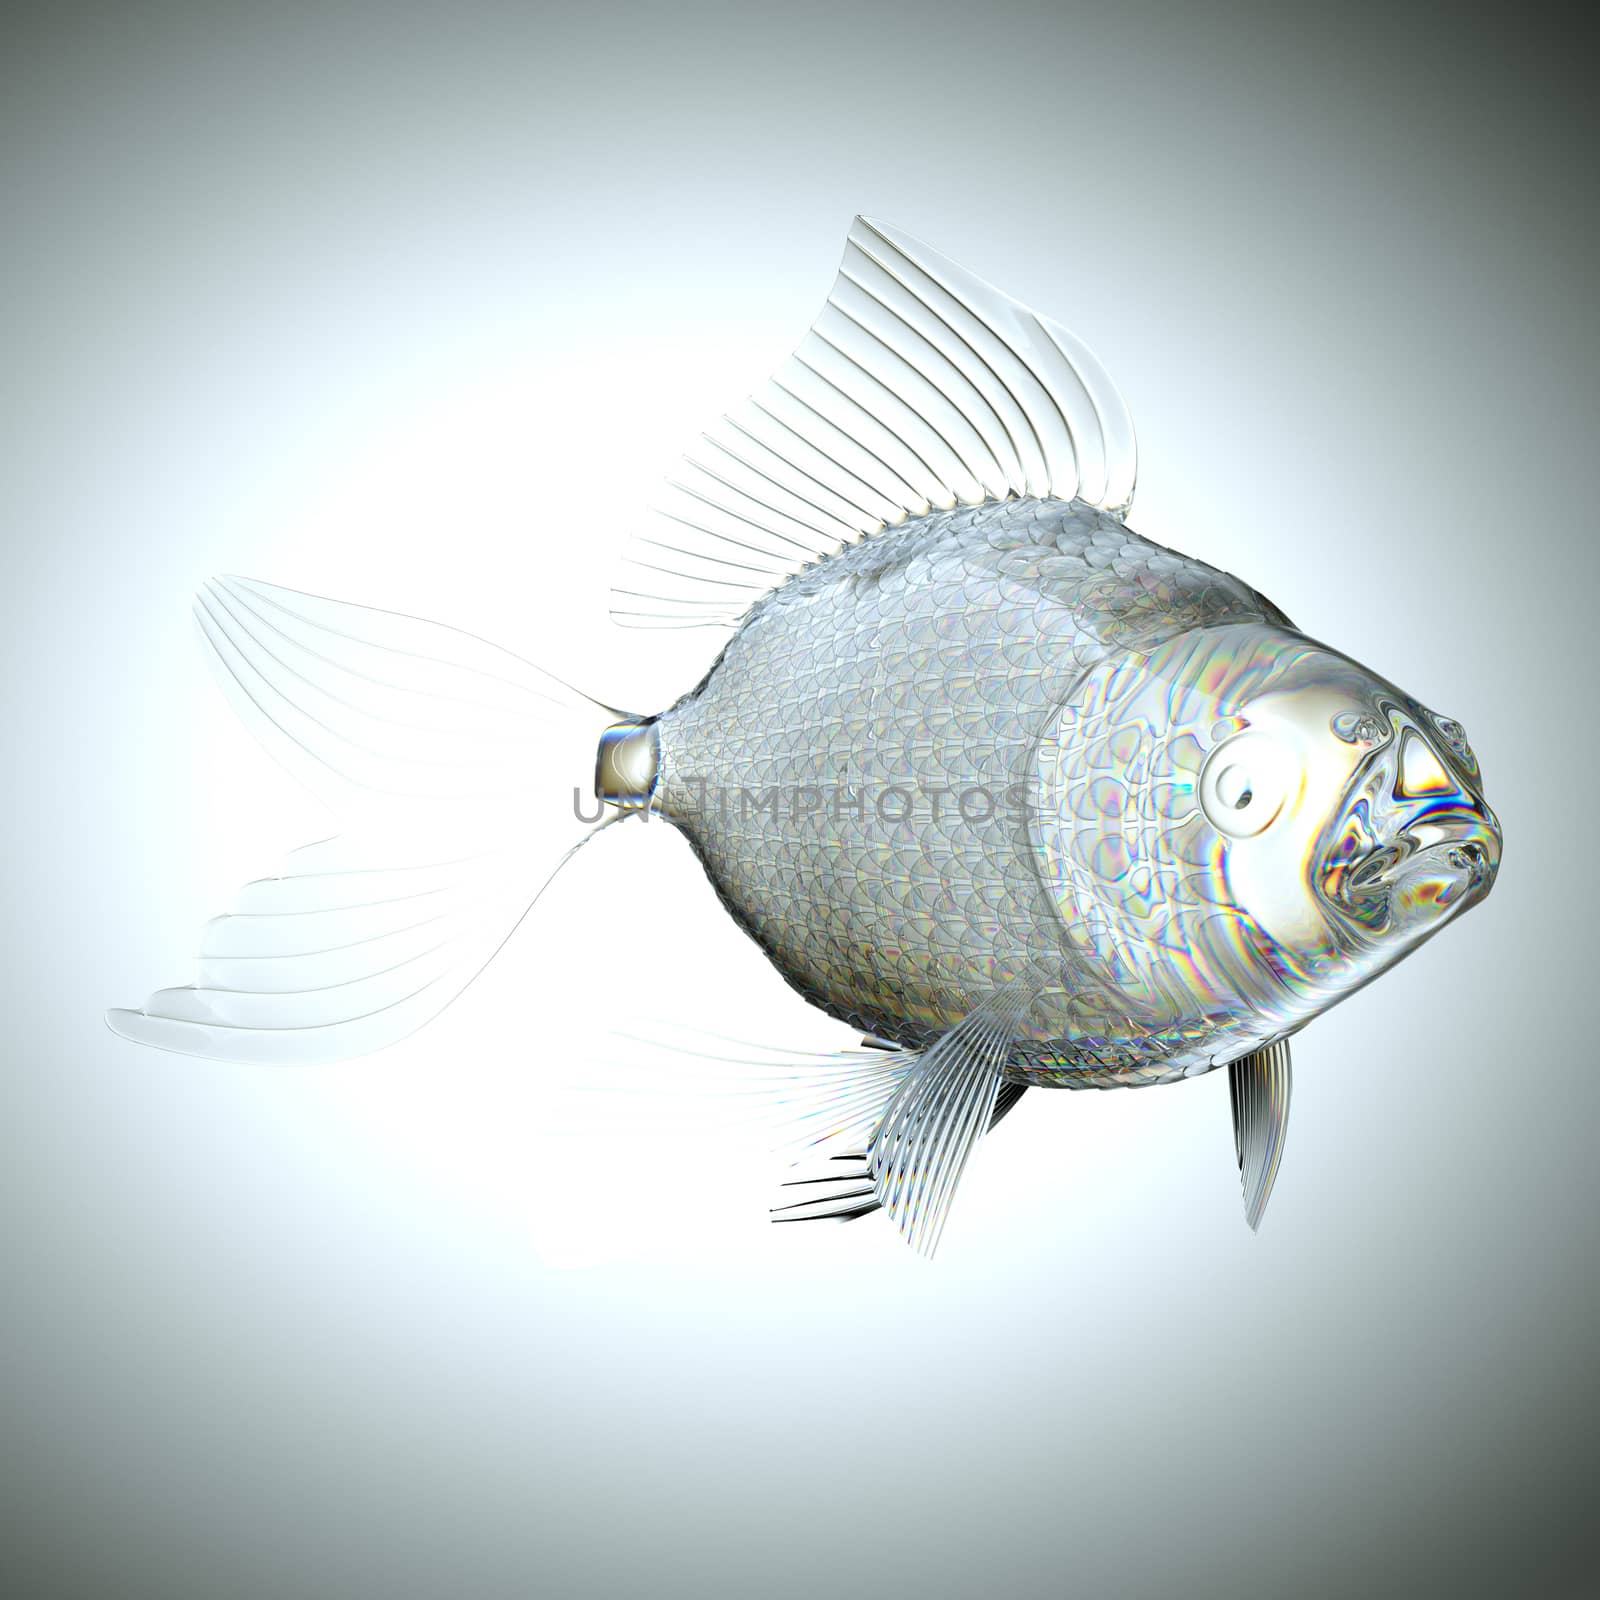 Glassy semitransparent fish with scales and fins. Large resolution